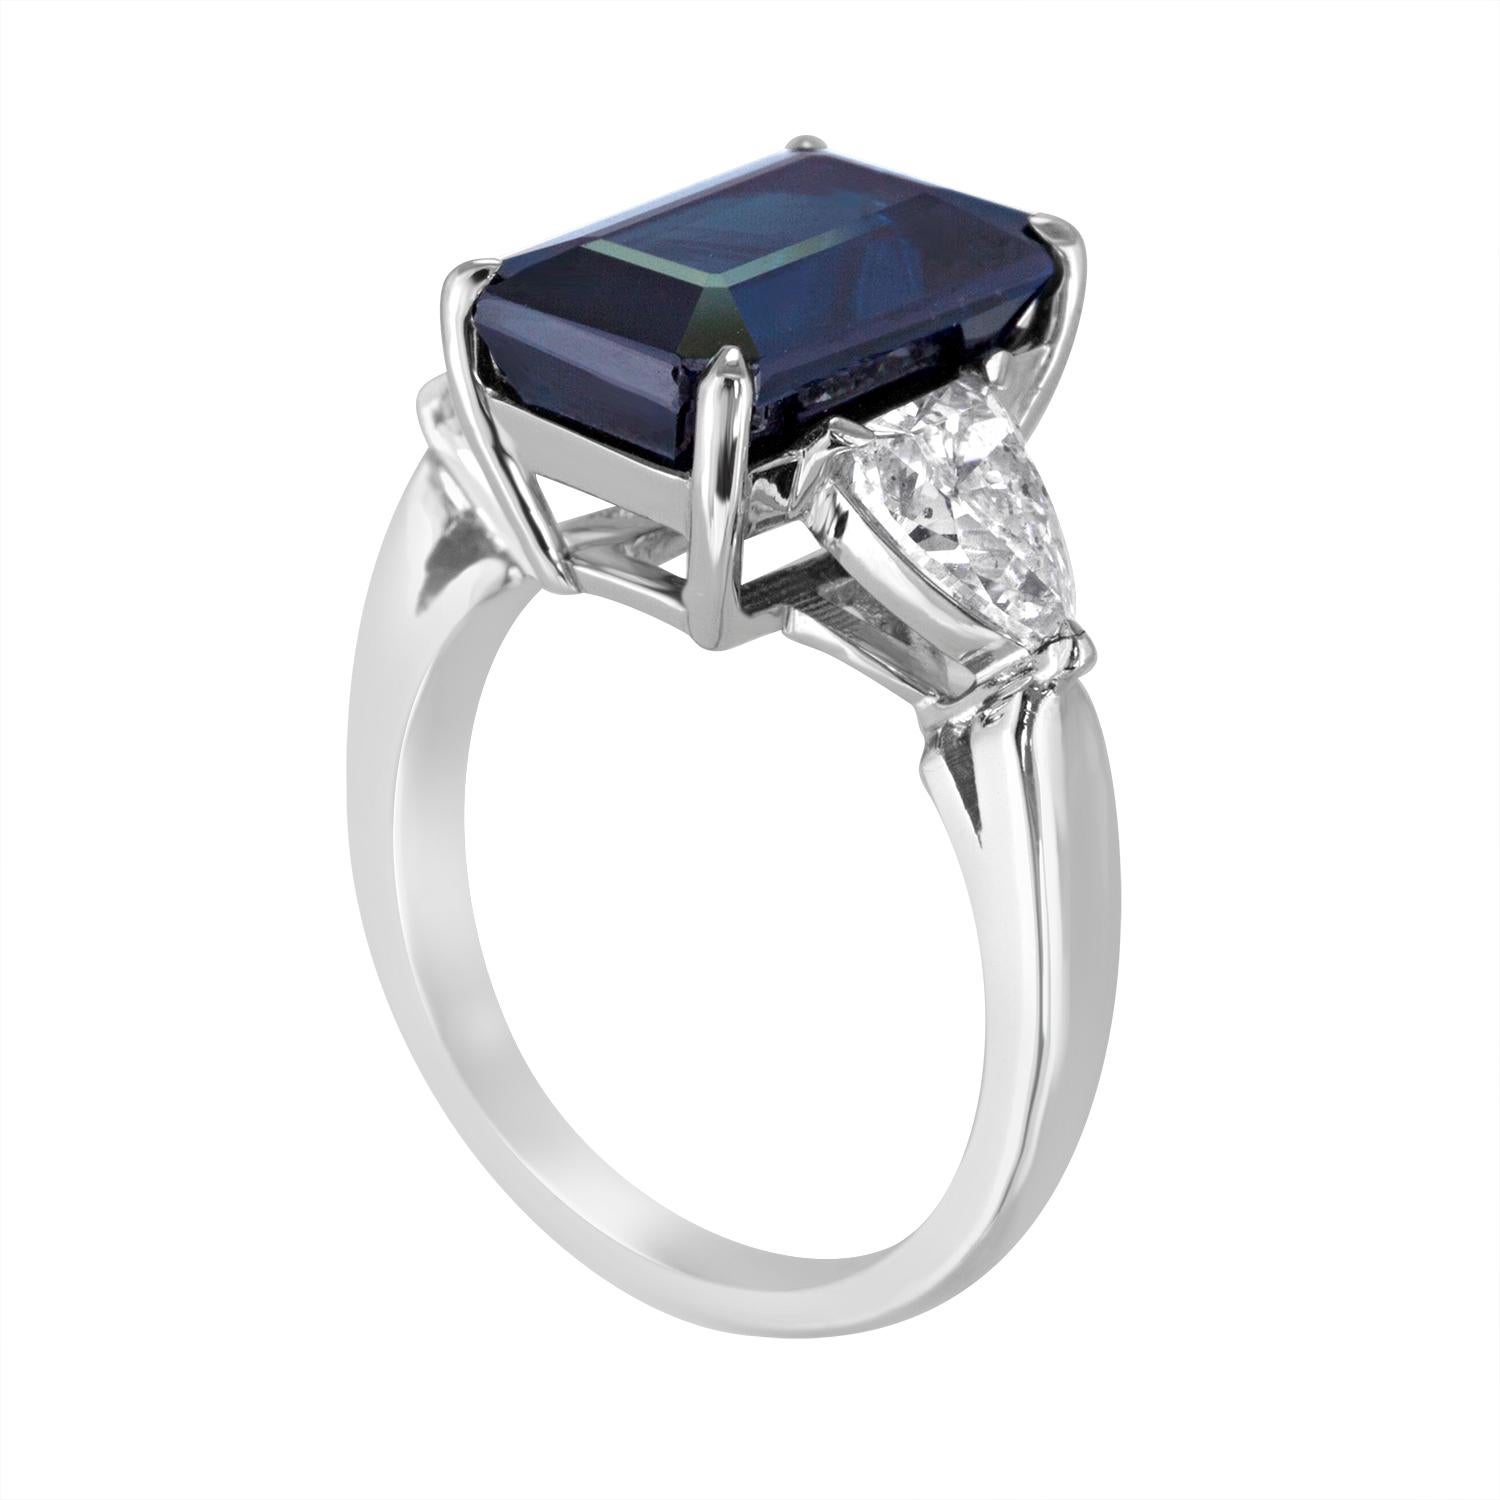 Beautiful 3 Stone Sapphire Ring.
The ring is 18K White Gold.
There are 1.22 Carats in Diamonds G SI, bullet shape.
The center stone is a 7.48 Carats Natural Greenish Blue Sapphire.
The Sapphire is Octagon Step Cut and NO Heat.
The Sapphire is